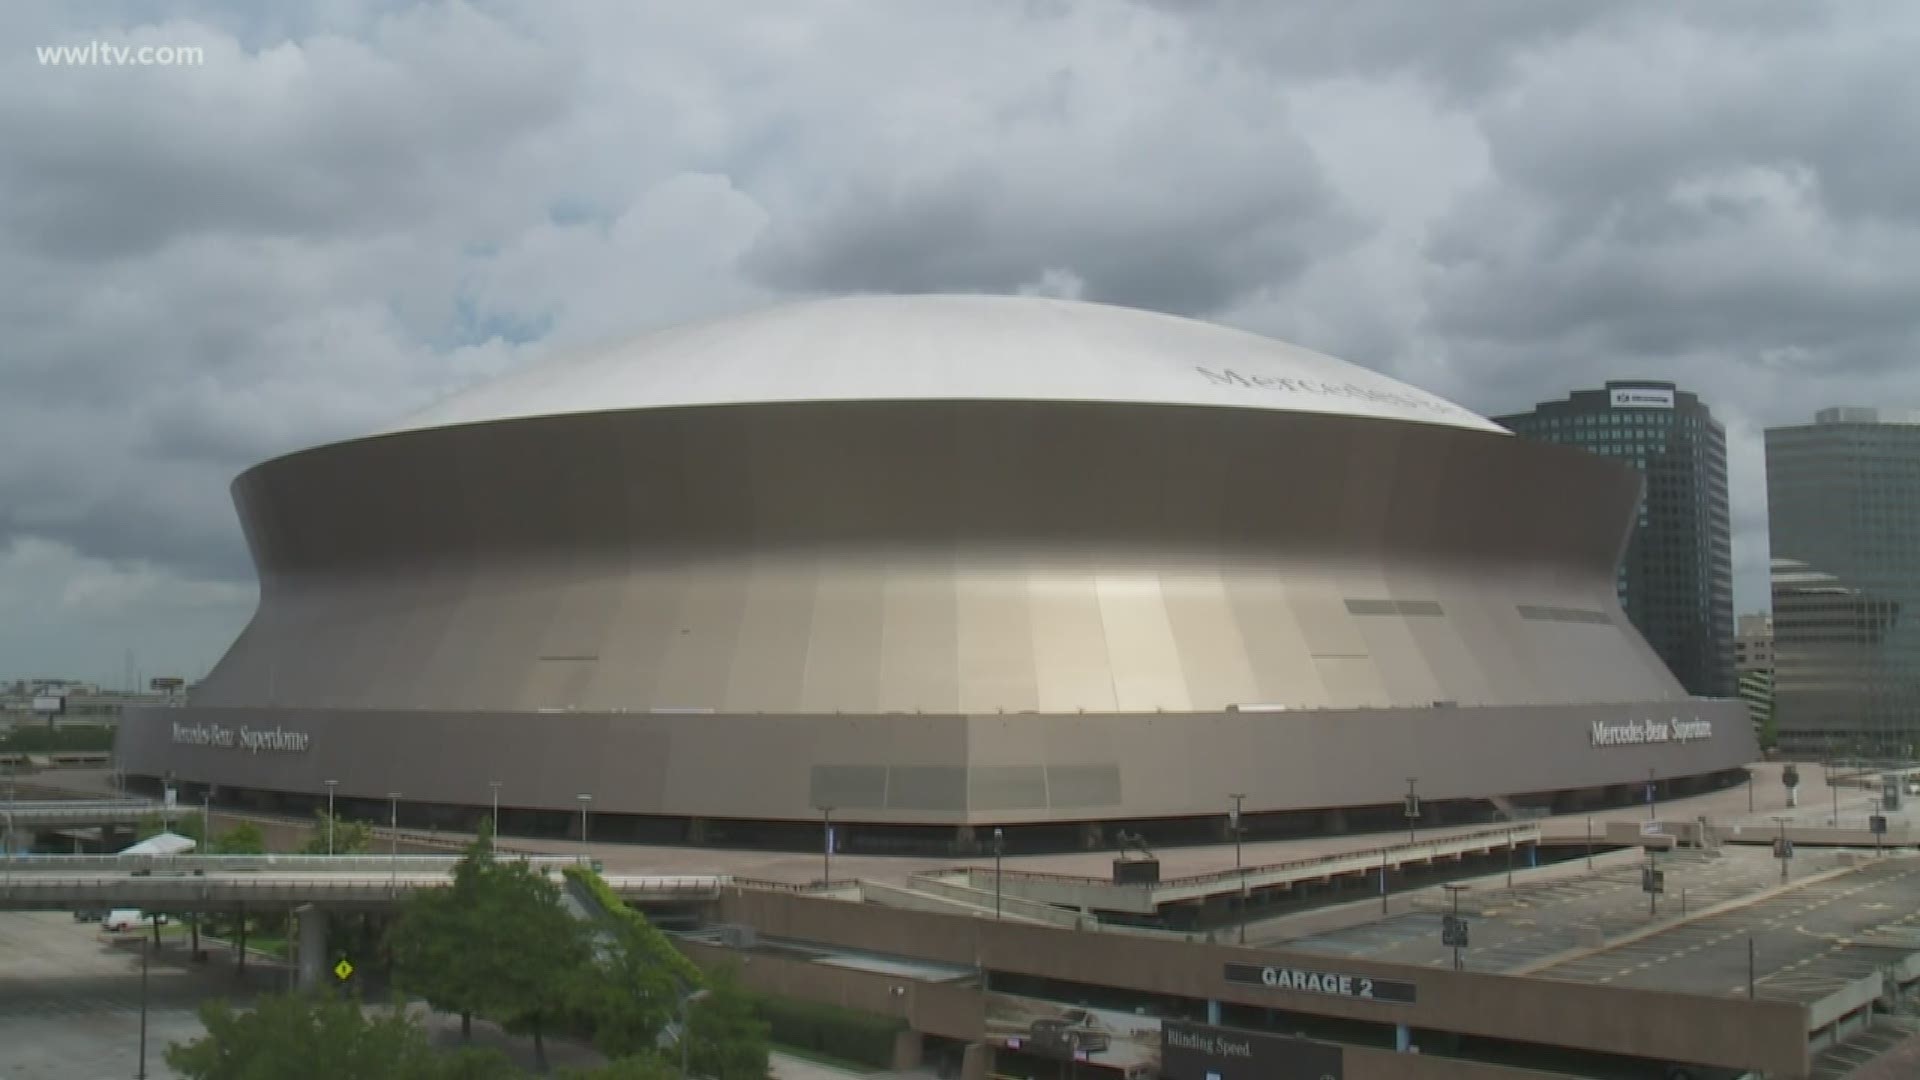 The Mercedes-Benz Superdome could get a $450 million renovation in the coming years.